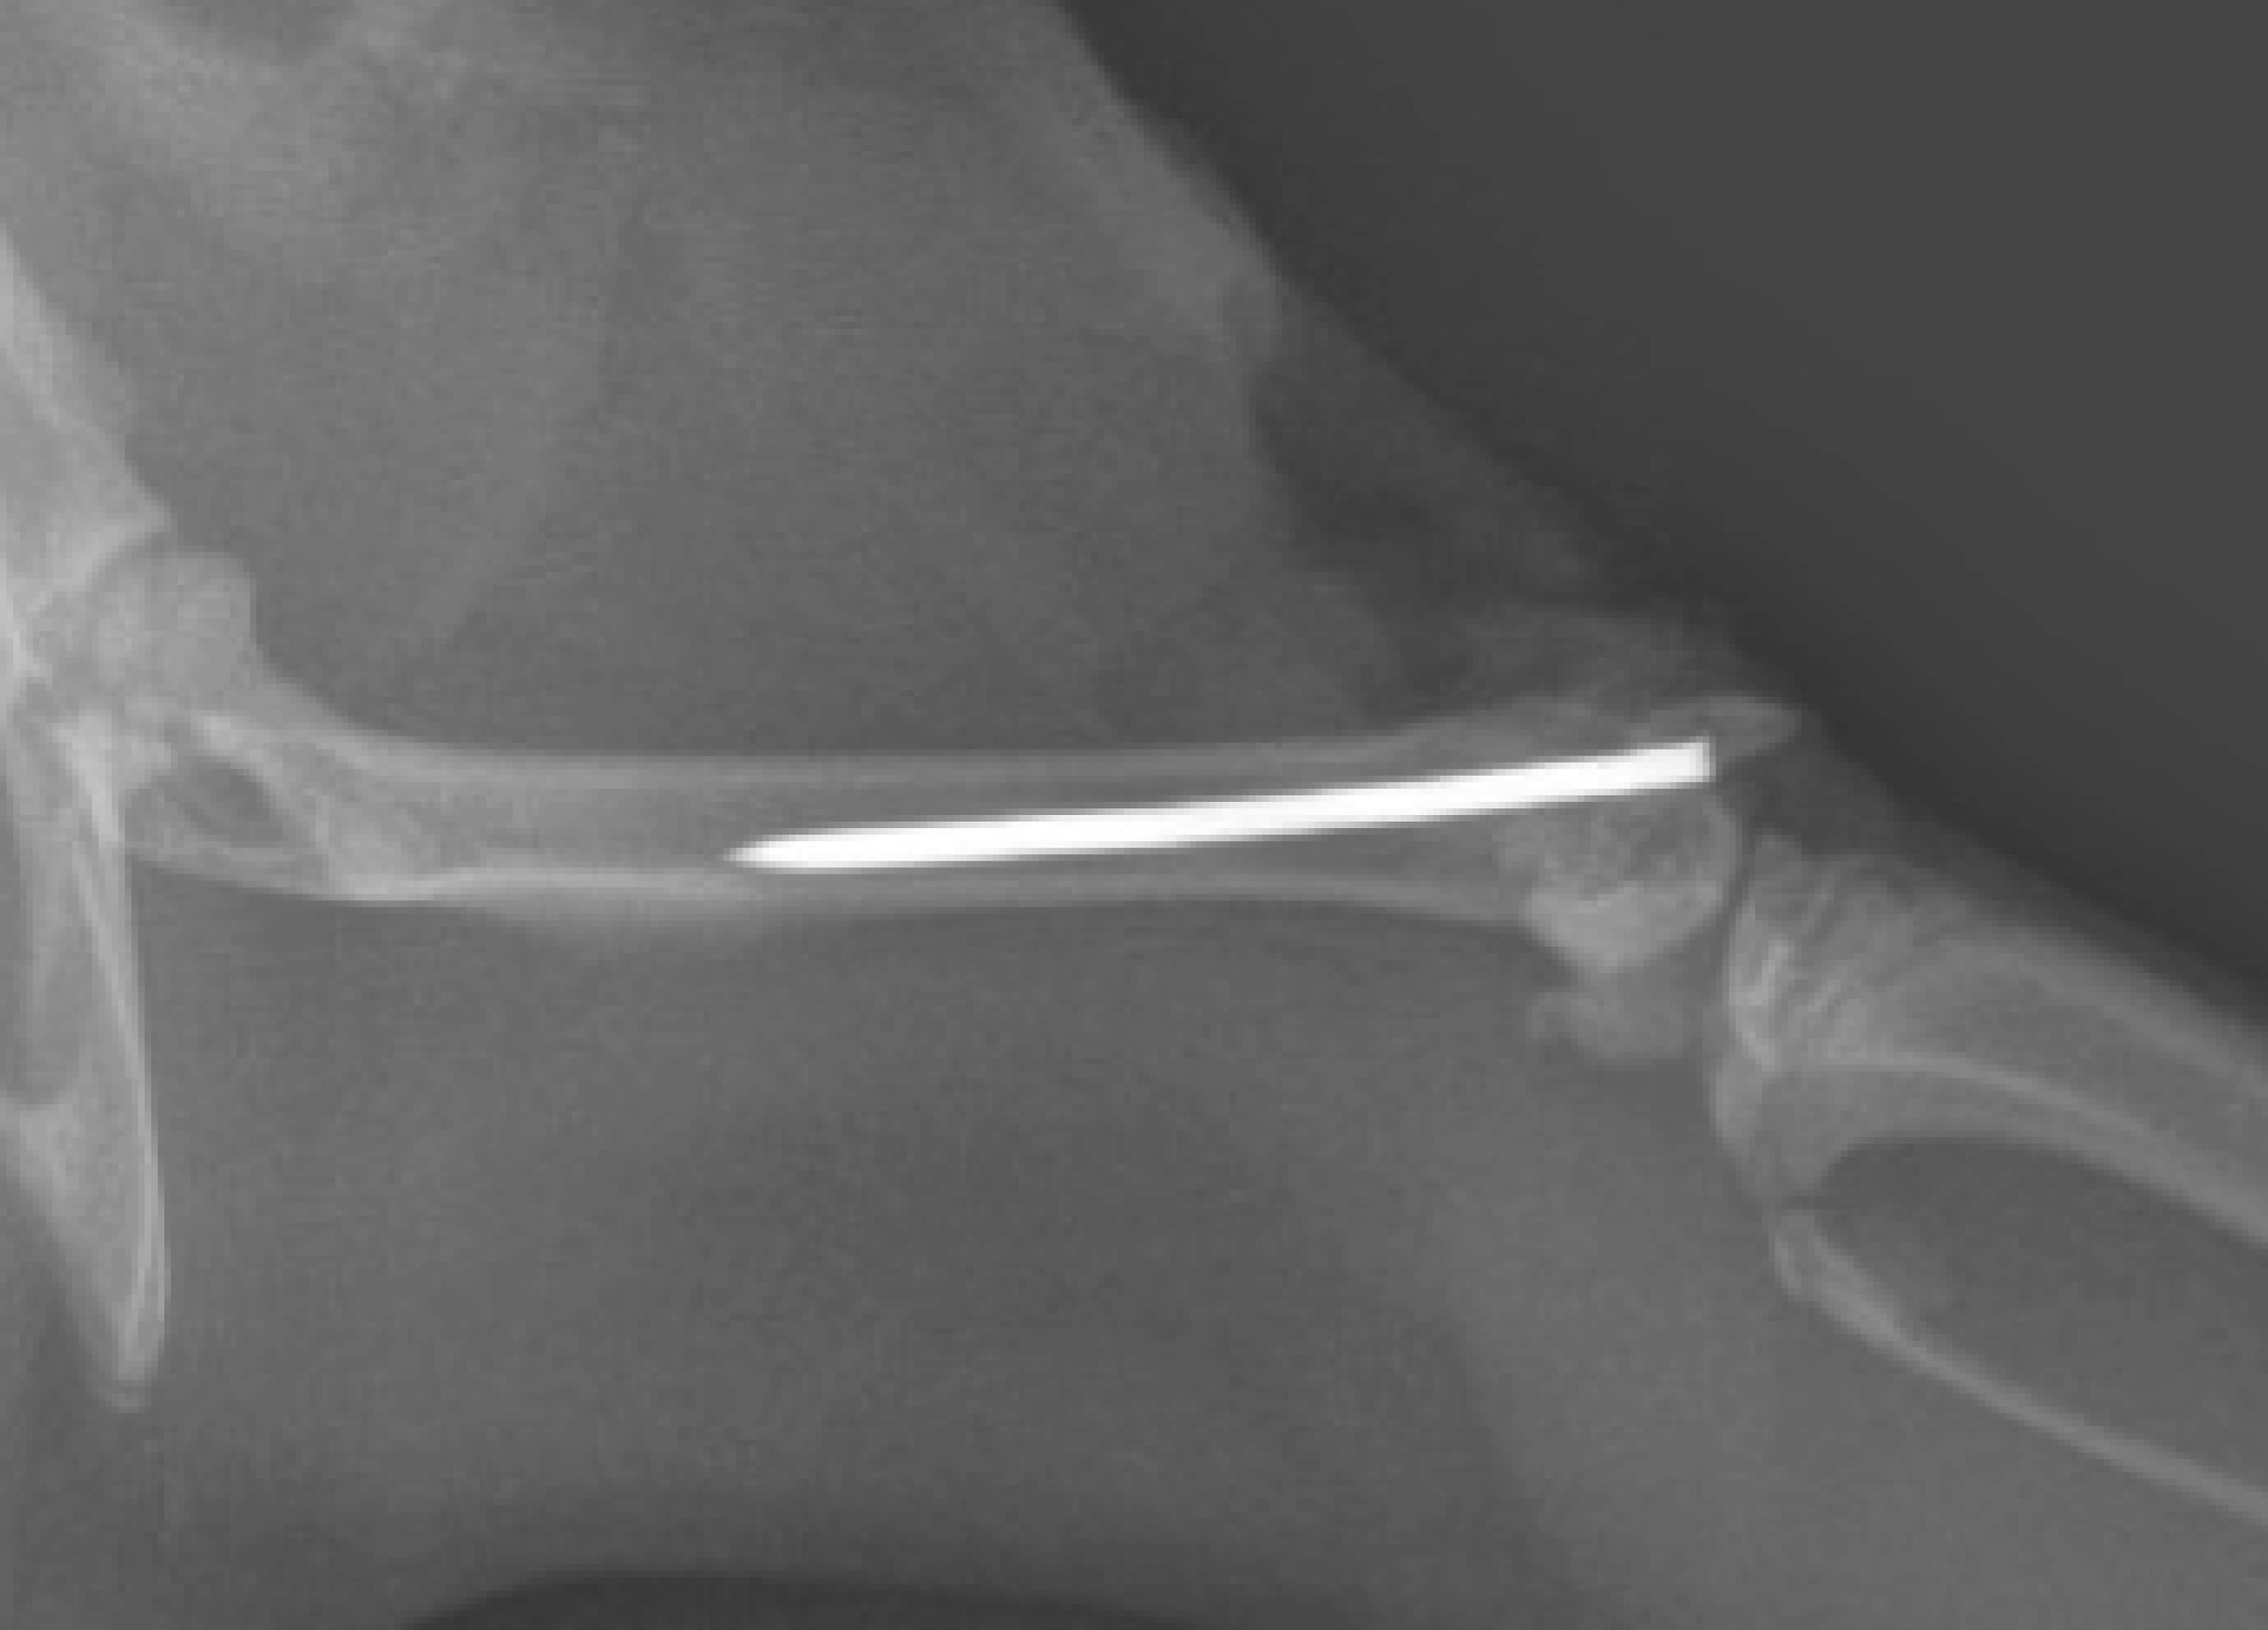 Fig. 2 
            Representative lateral radiograph after intra-articular implant. A unilateral suprapatellar arthrotomy was performed. A sterile operation-grade Kirschner wire (diameter, 0.088 mm; length, 20 mm) was inserted into the canal of the rat’s femoral bone, and the protruding part of the wire was positioned in the knee joint. Then, the joint and skin incision was closed with 4 to 0 sutures after irrigation by ethylenediaminetetraacetic acid dissolved in normal saline.
          